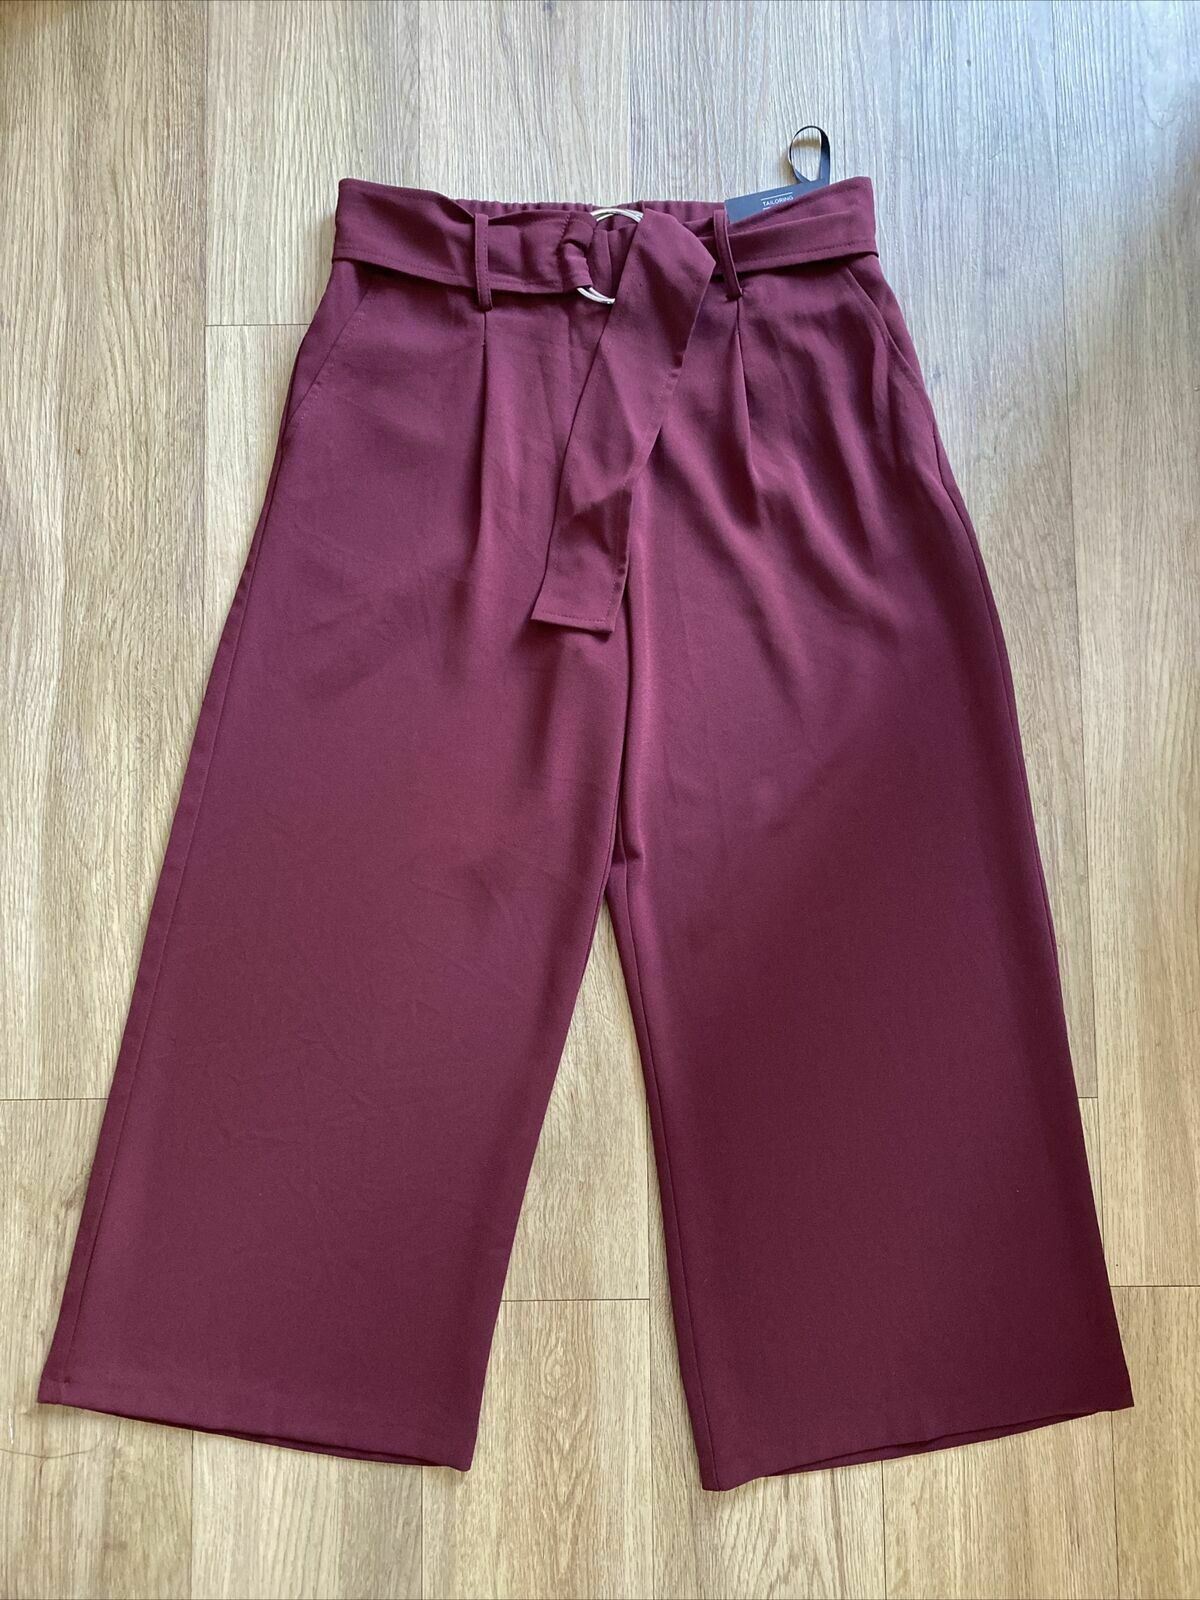 Dorothy Perkins Tailoring Crop Wide Leg Trousers Berry Red Culottes 6 10 12 16